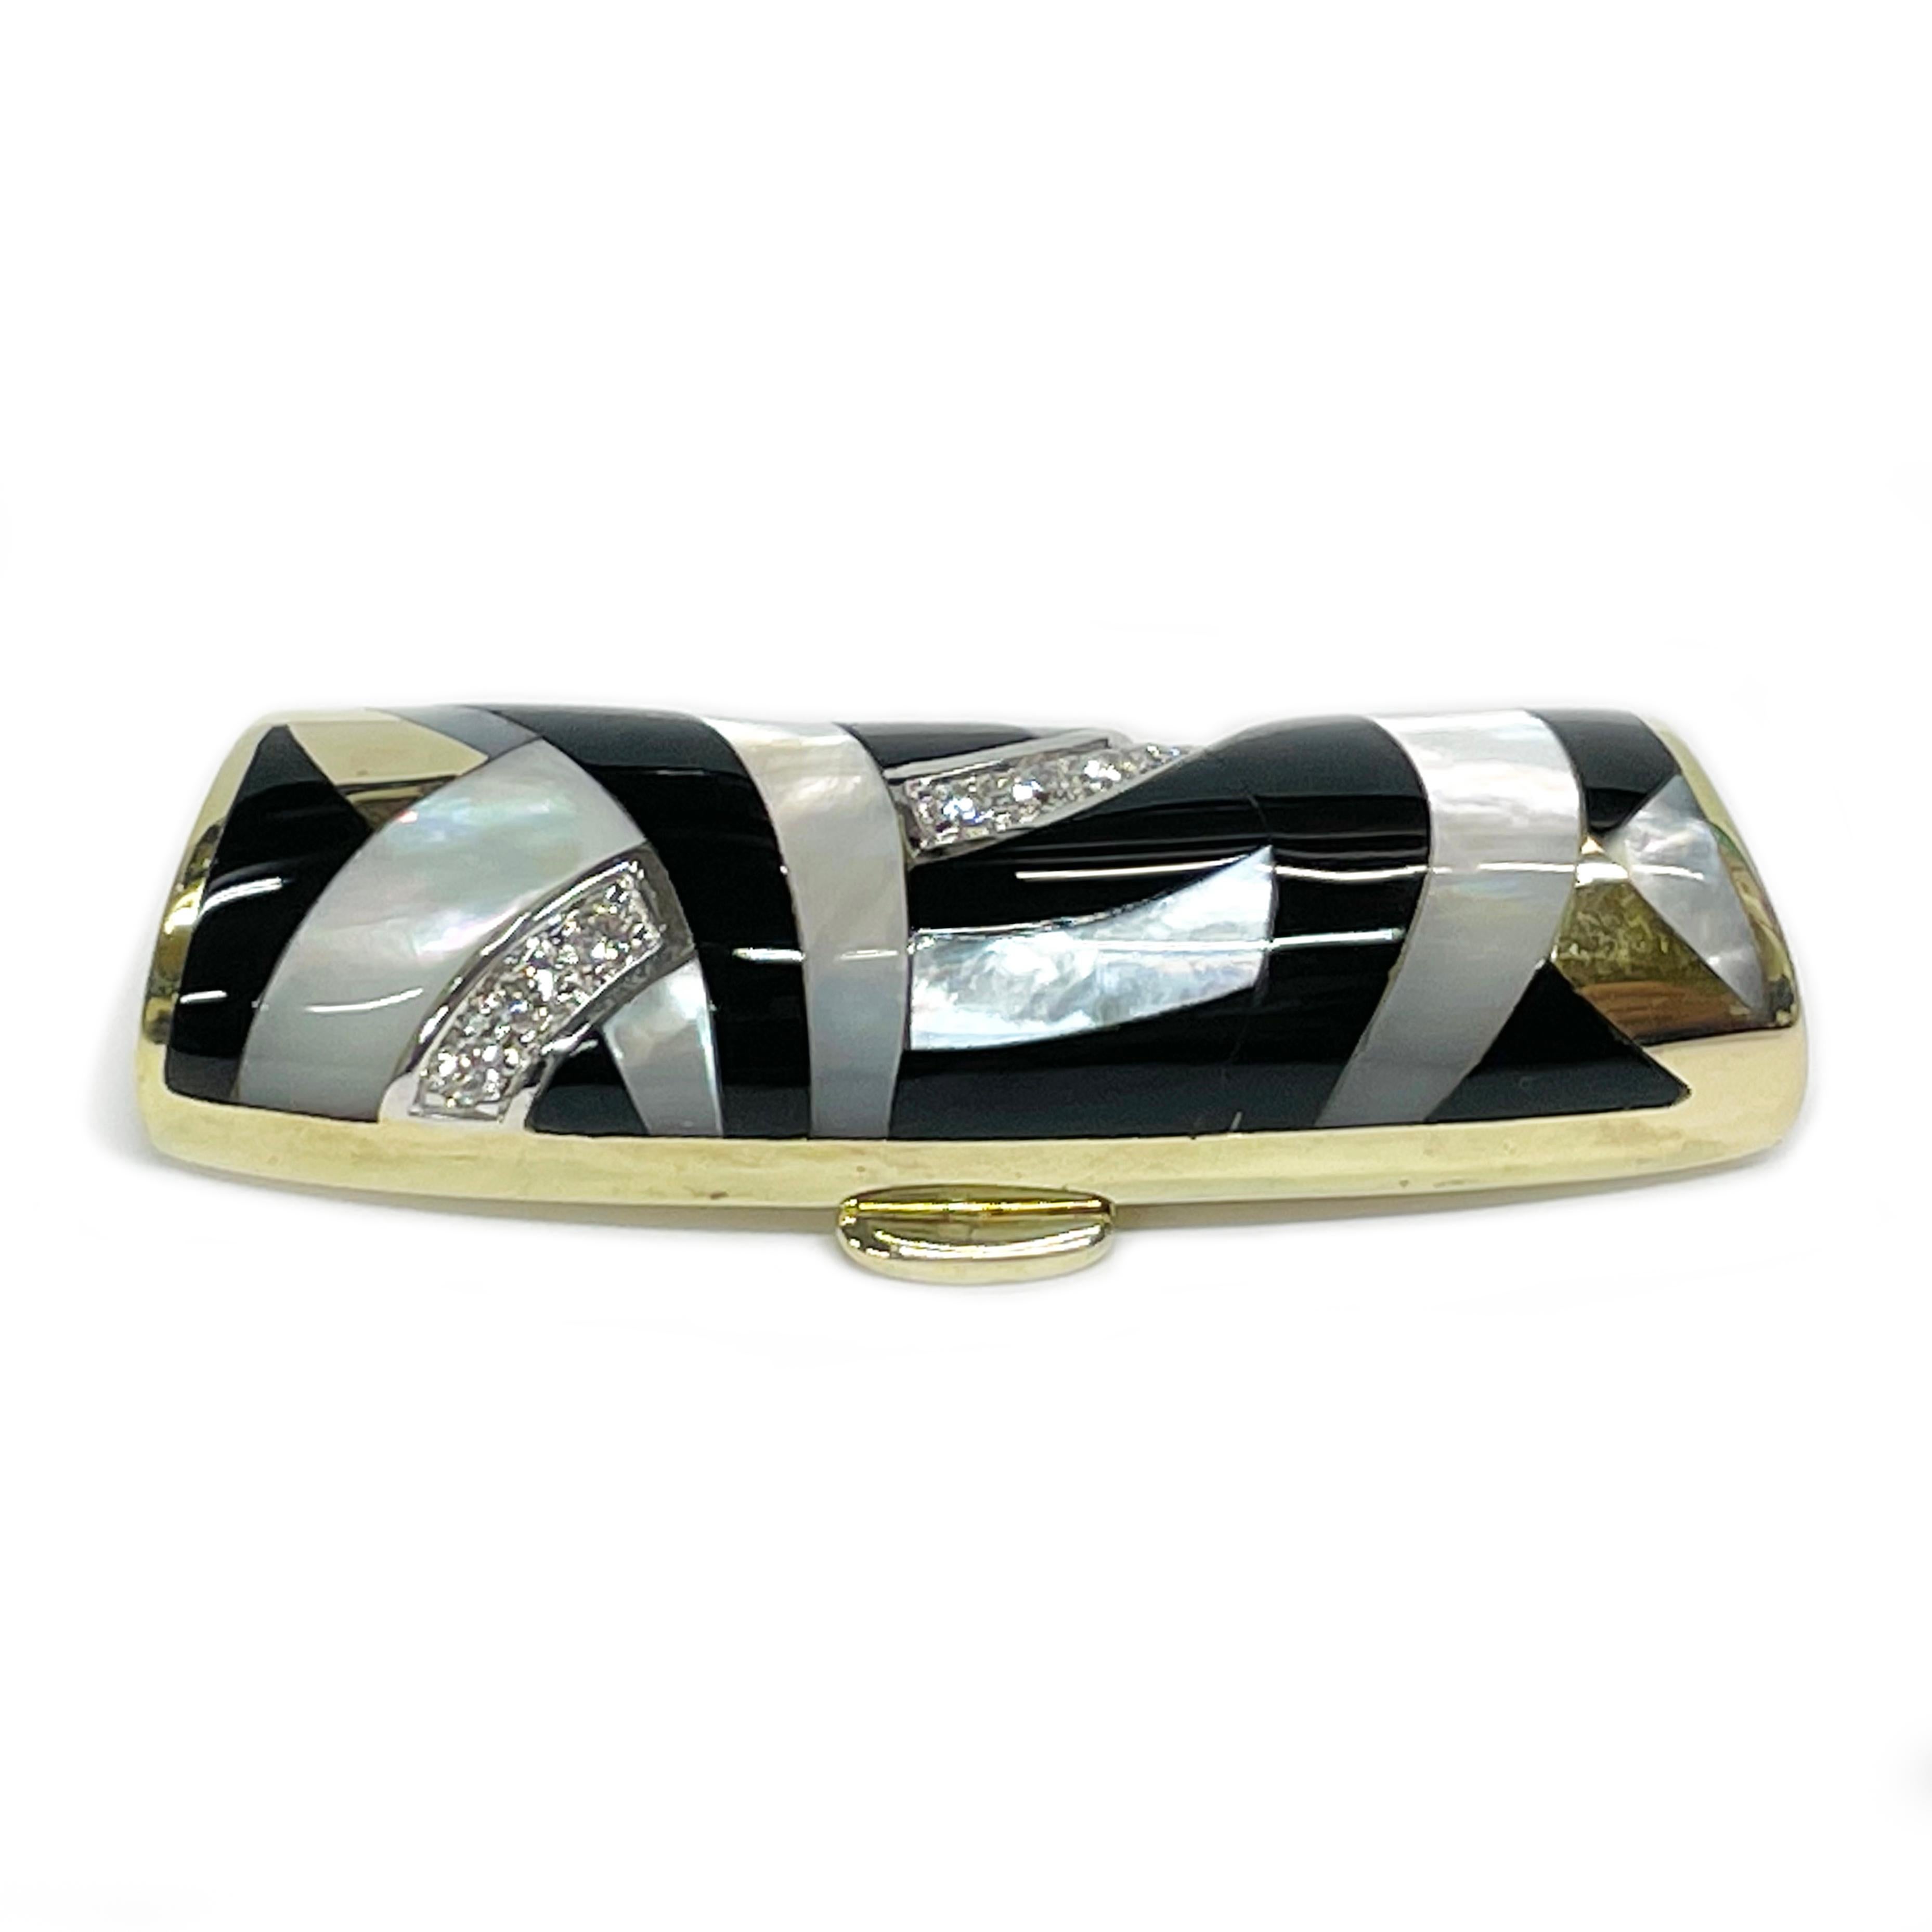 Asch Grossbardt Diamond, Mother of Pearl, Onyx 14K Slider Pendant. The slide pendant features inlays of swooshes of mother of pearl and onyx with a swoosh of diamonds bead-set in white gold with yellow gold trim. The five round 1.8mm diamonds are